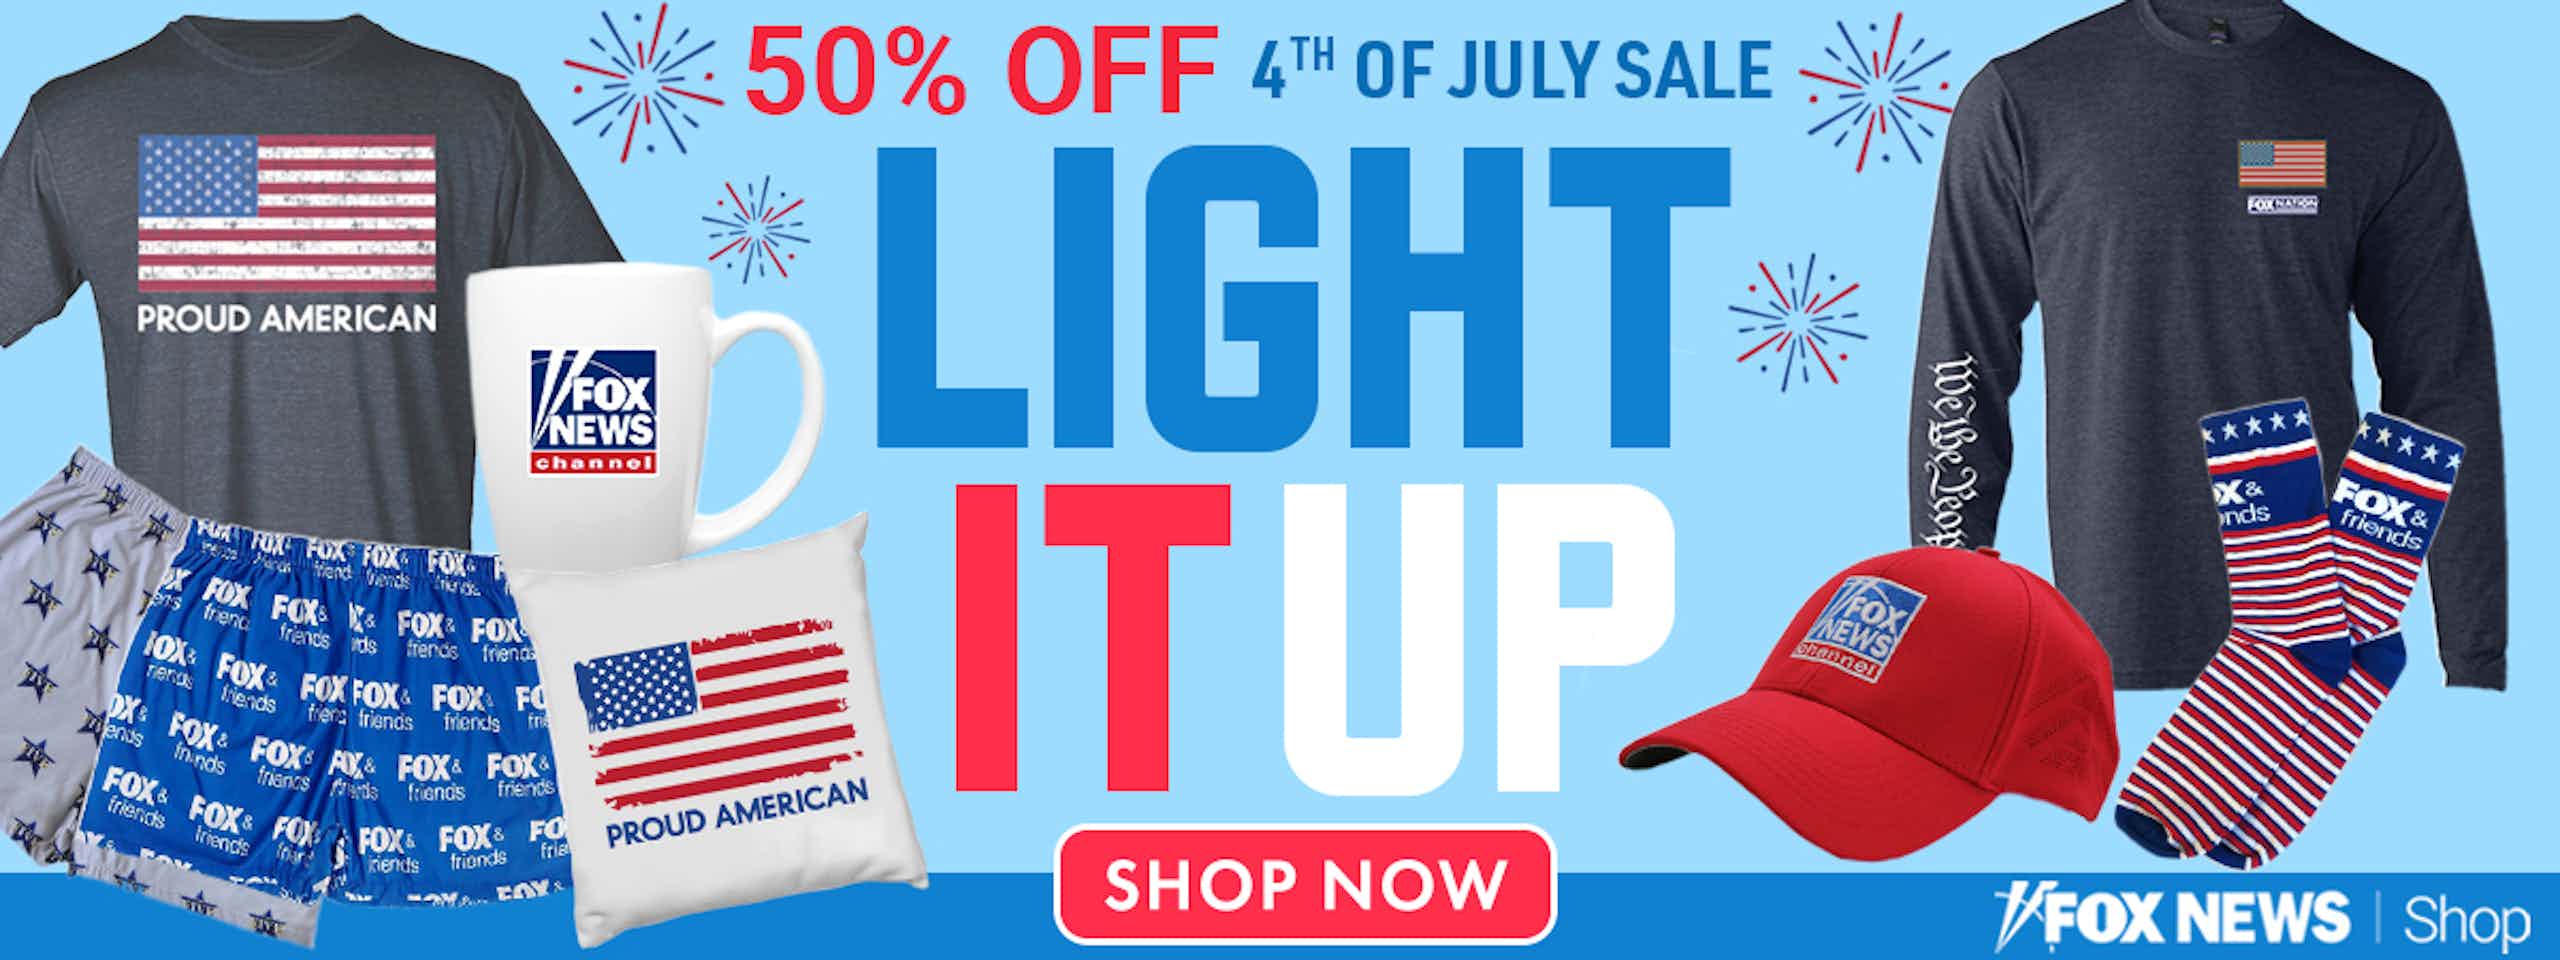 July 4th Sale - 50% Off Collection